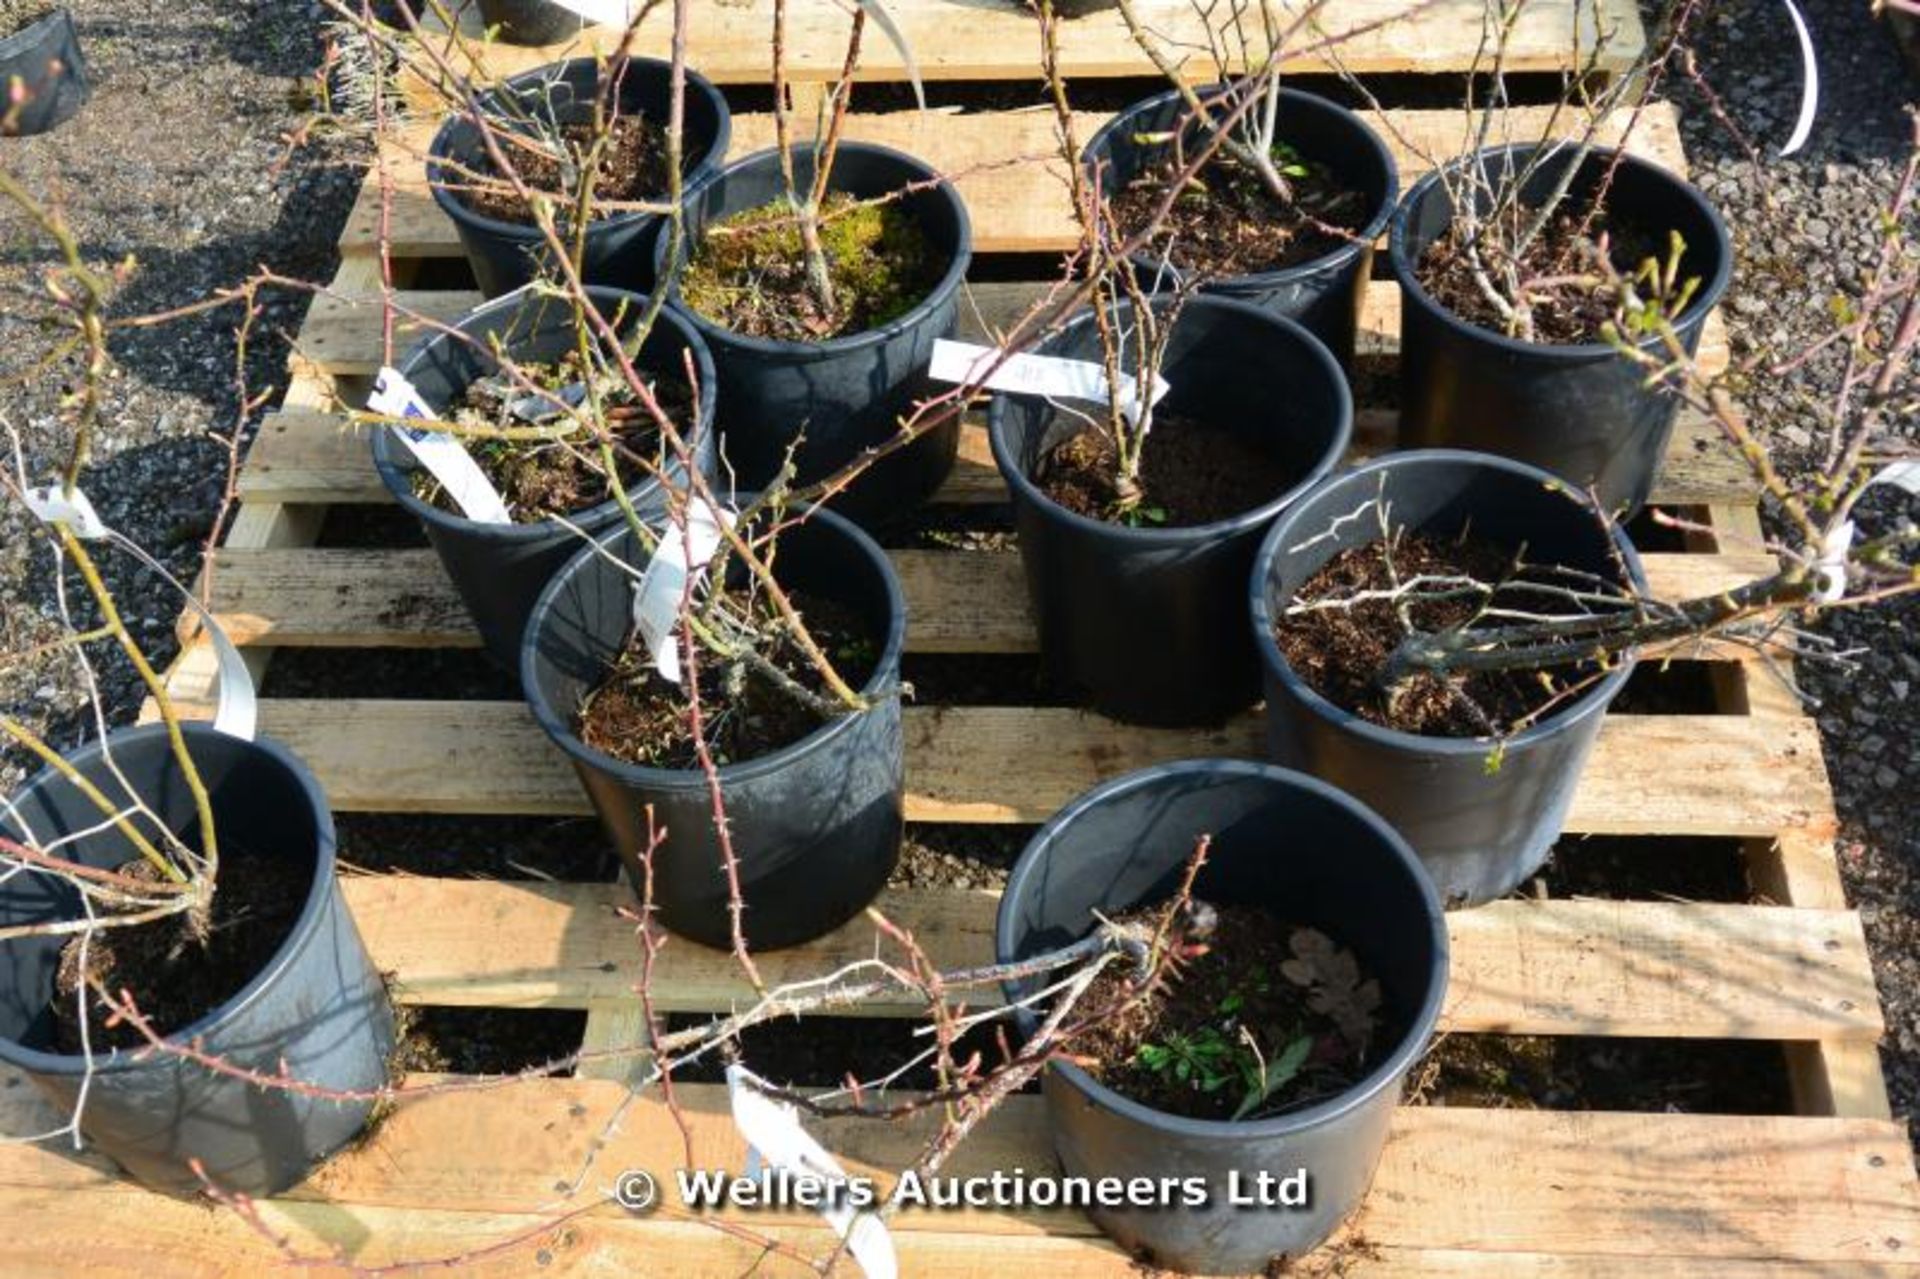 *Collection of 10 Dog rose - Rosa canina -ideal for hedging 7 litre (Location: G/House)